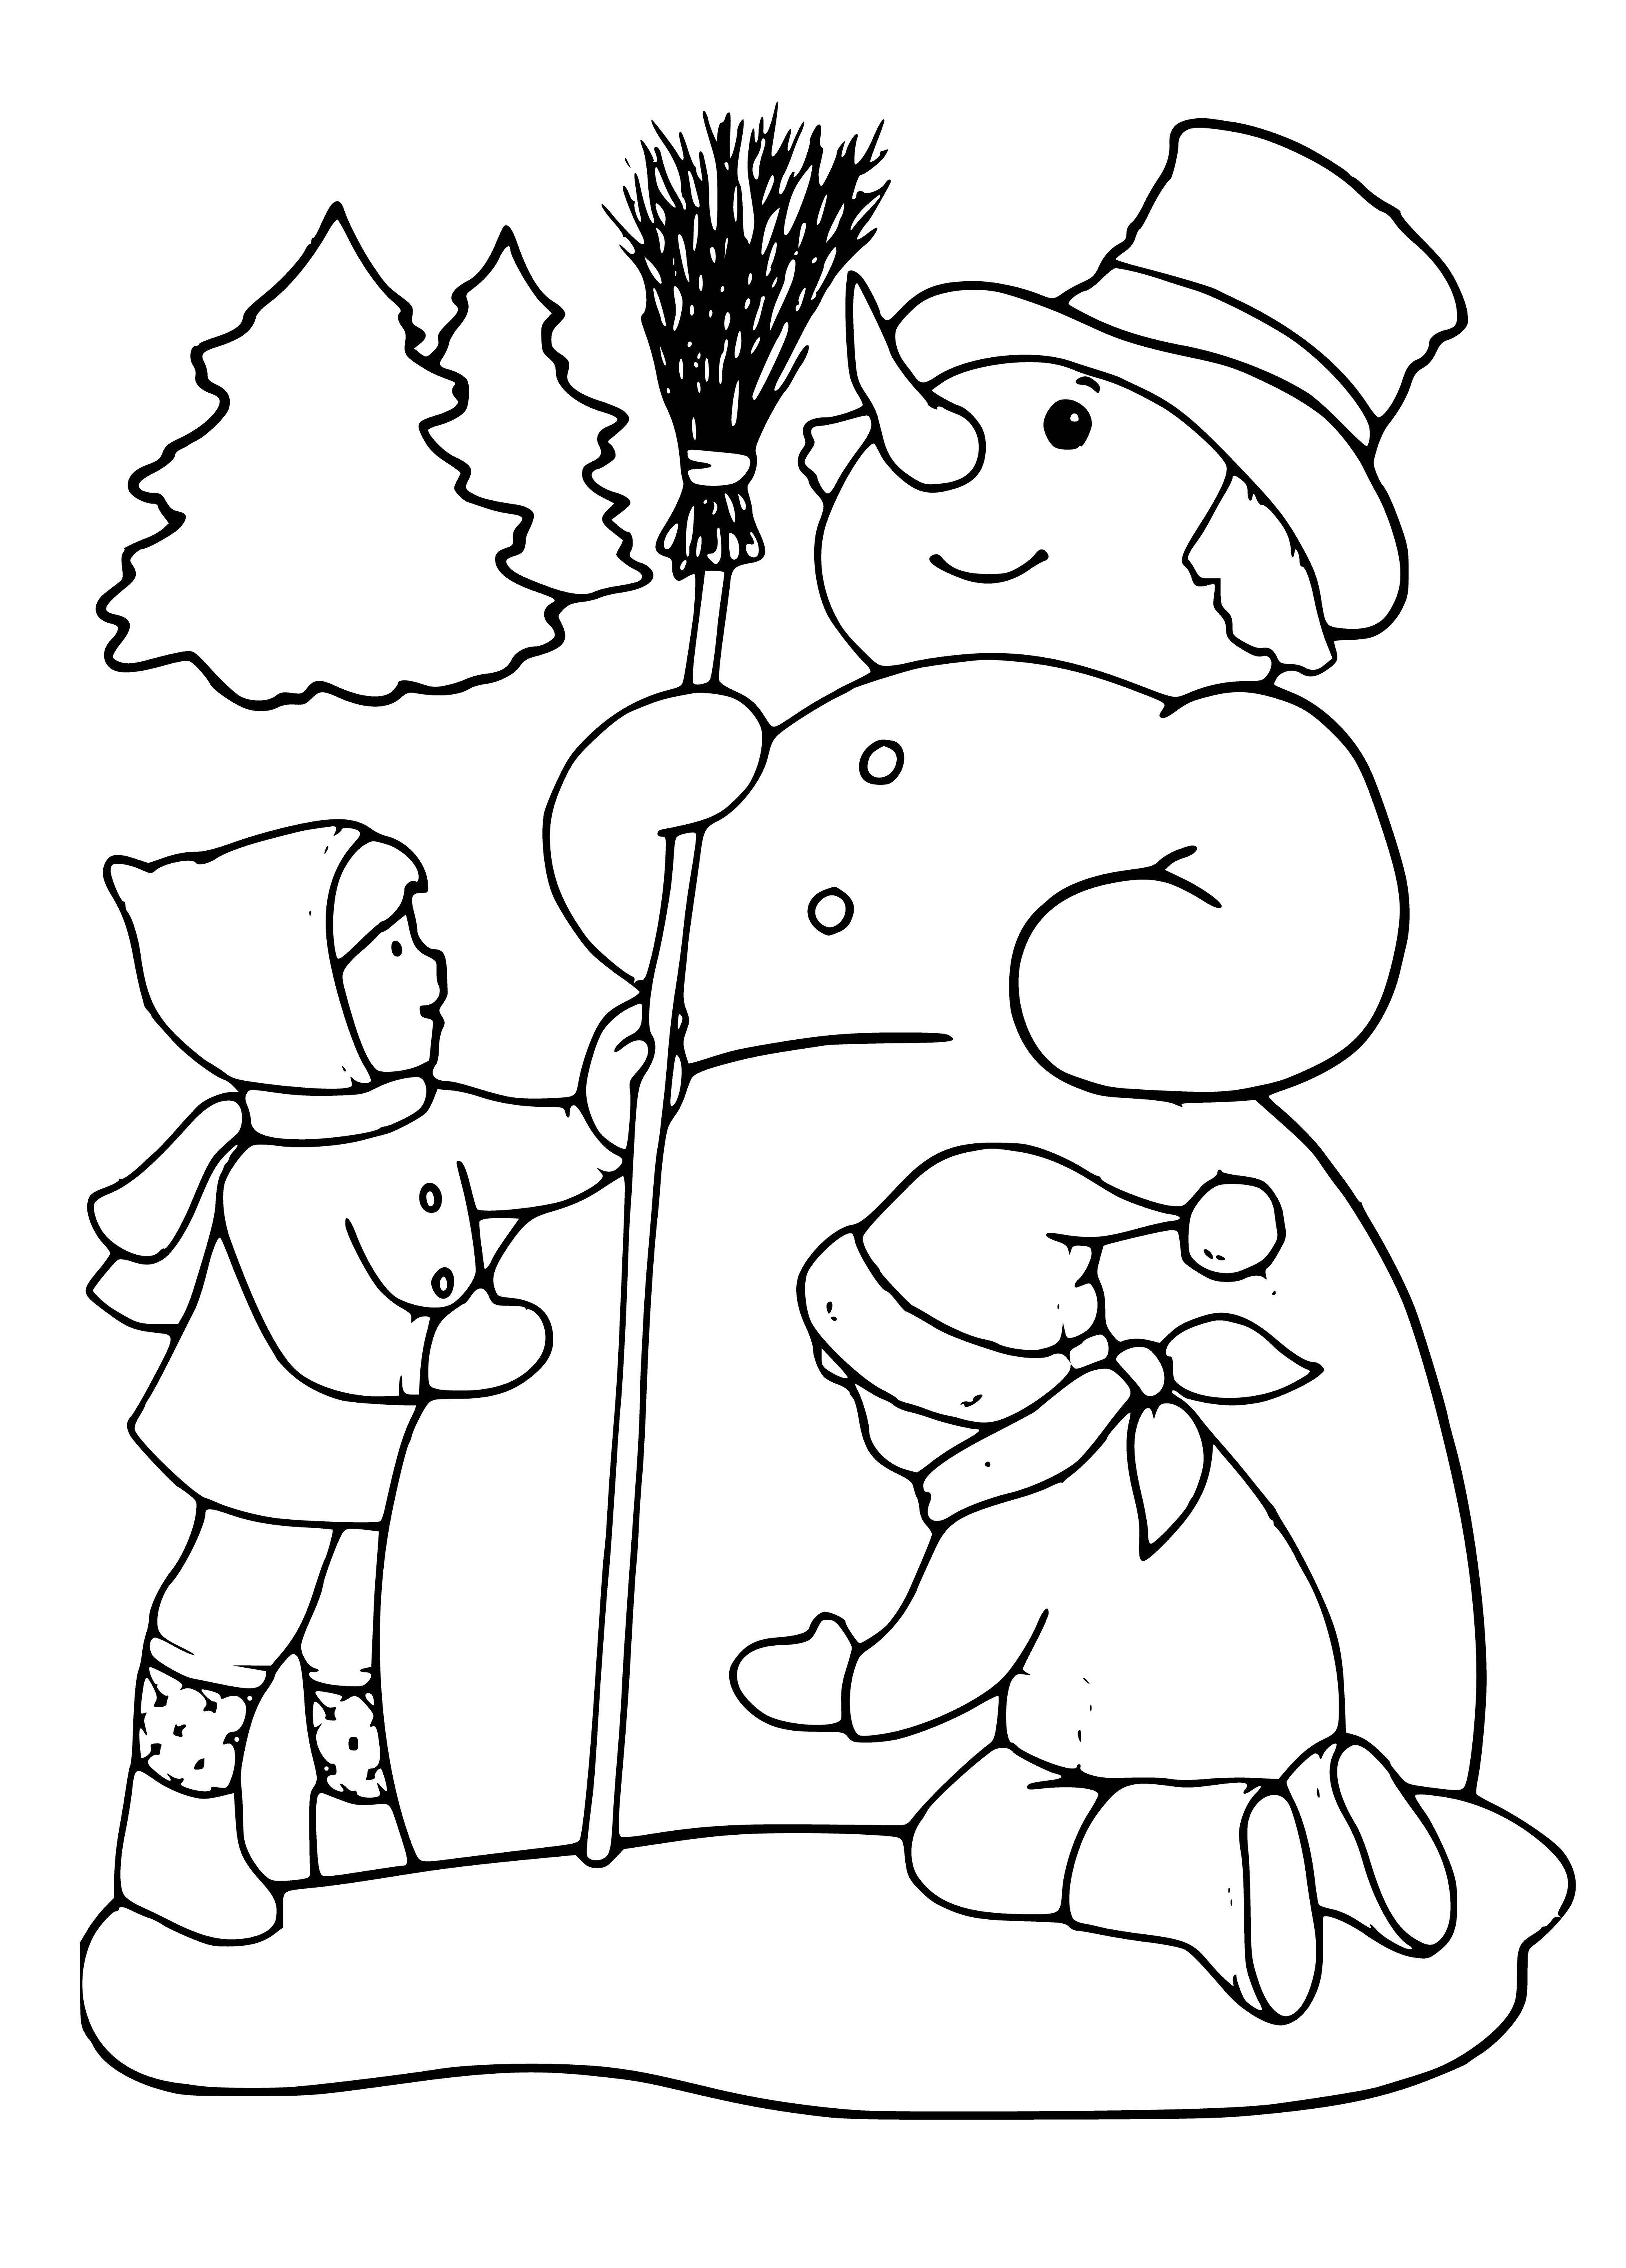 coloring page: Three kids, snowman with a carrot nose, coal eyes, wearing hats & scarves. Kids hold hands. Snowman also wears a scarf.